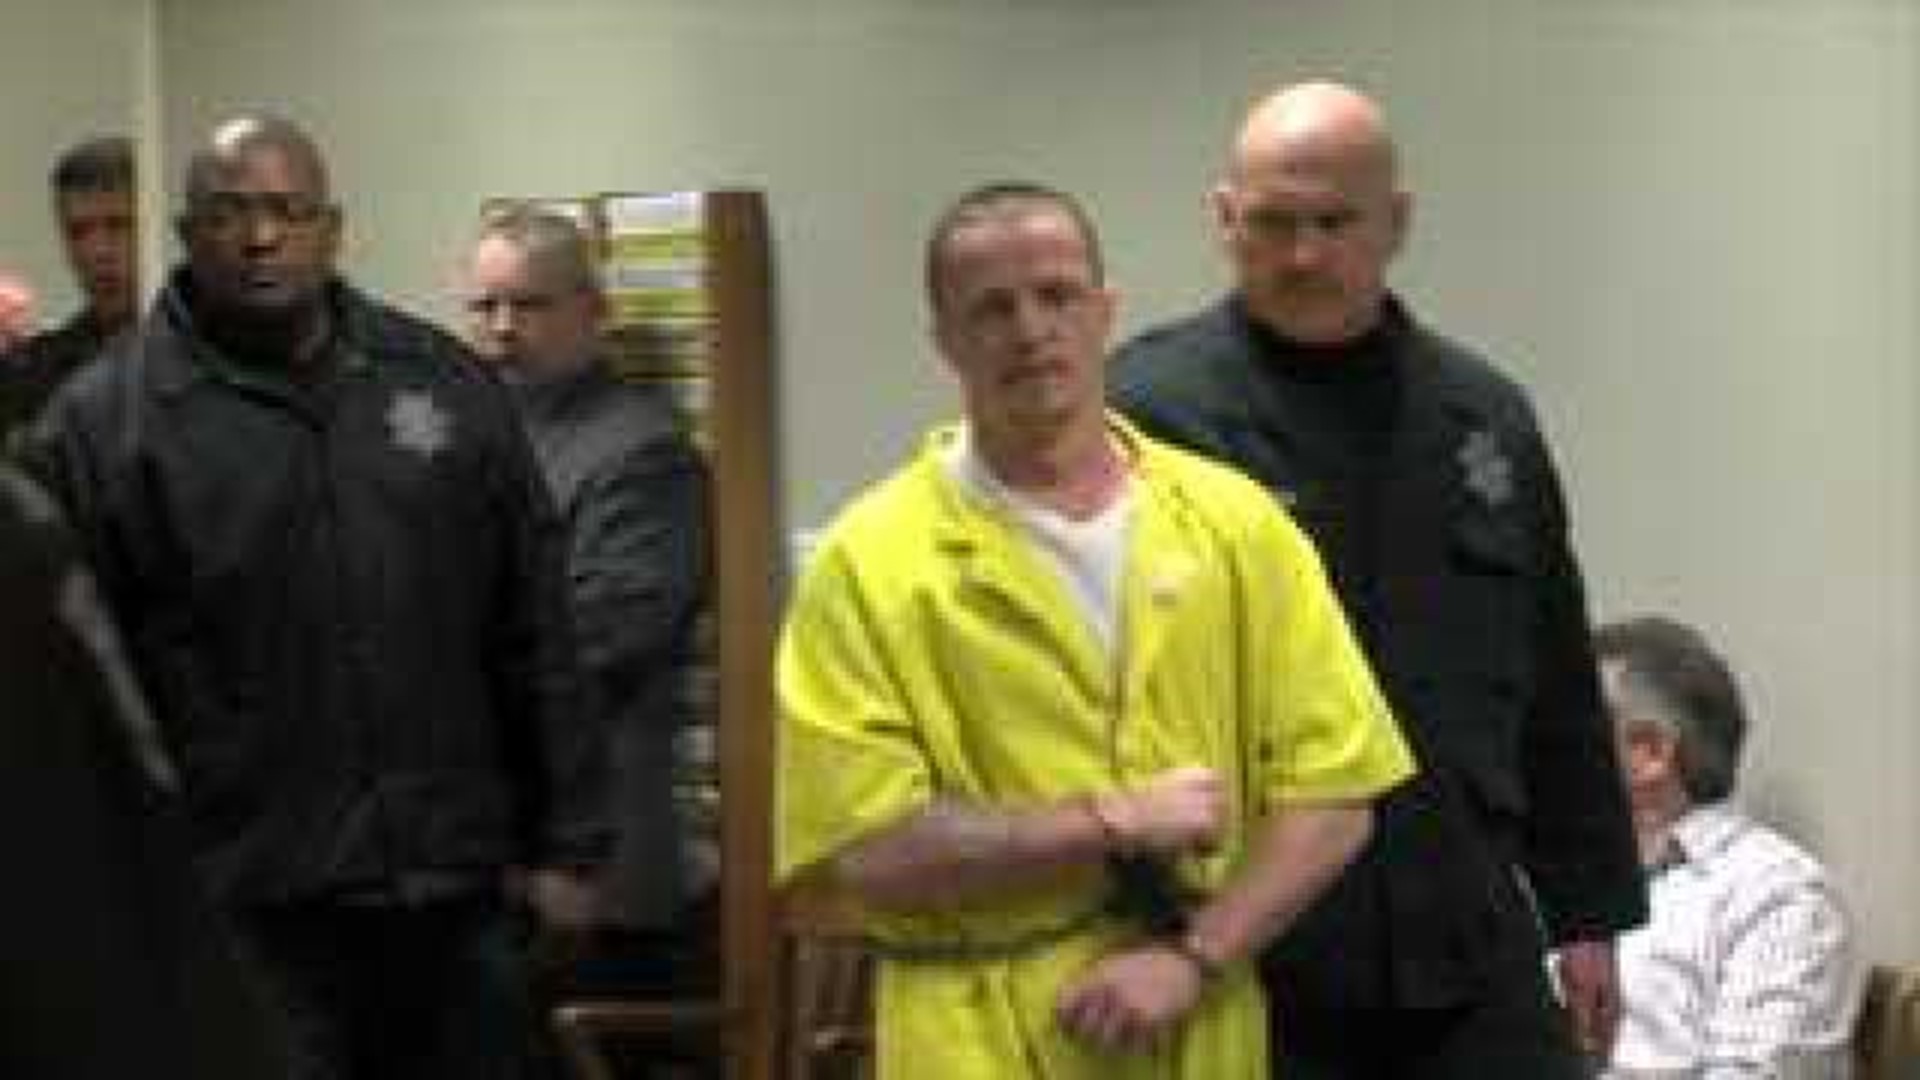 Nick Sheley gets second life sentence